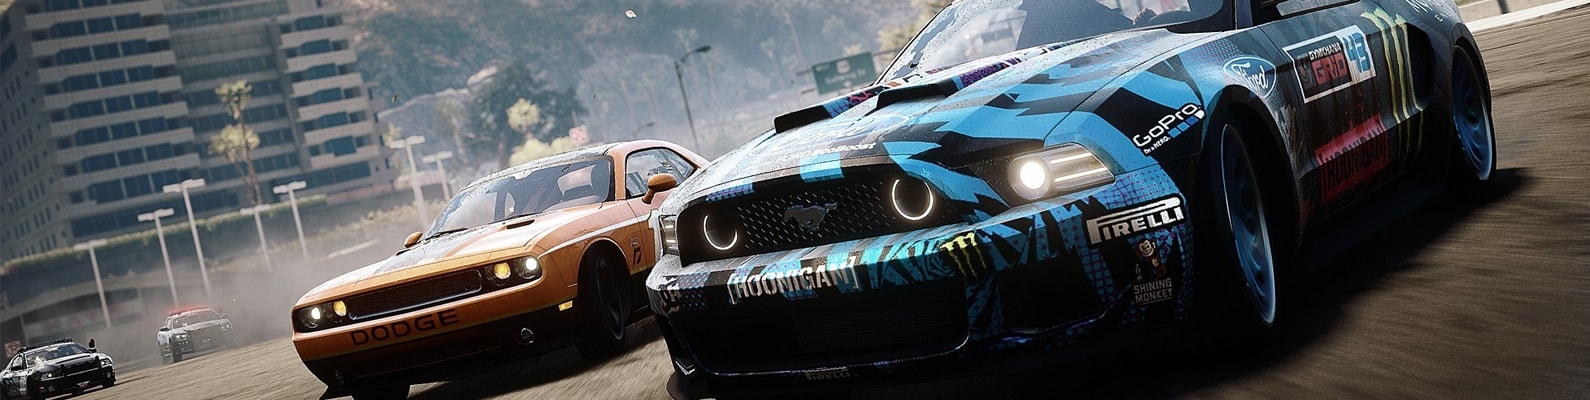 NFSR, nfs, ford, нфс, mustang, police, shelby, Rivals, Need for Speed, dodge challenger